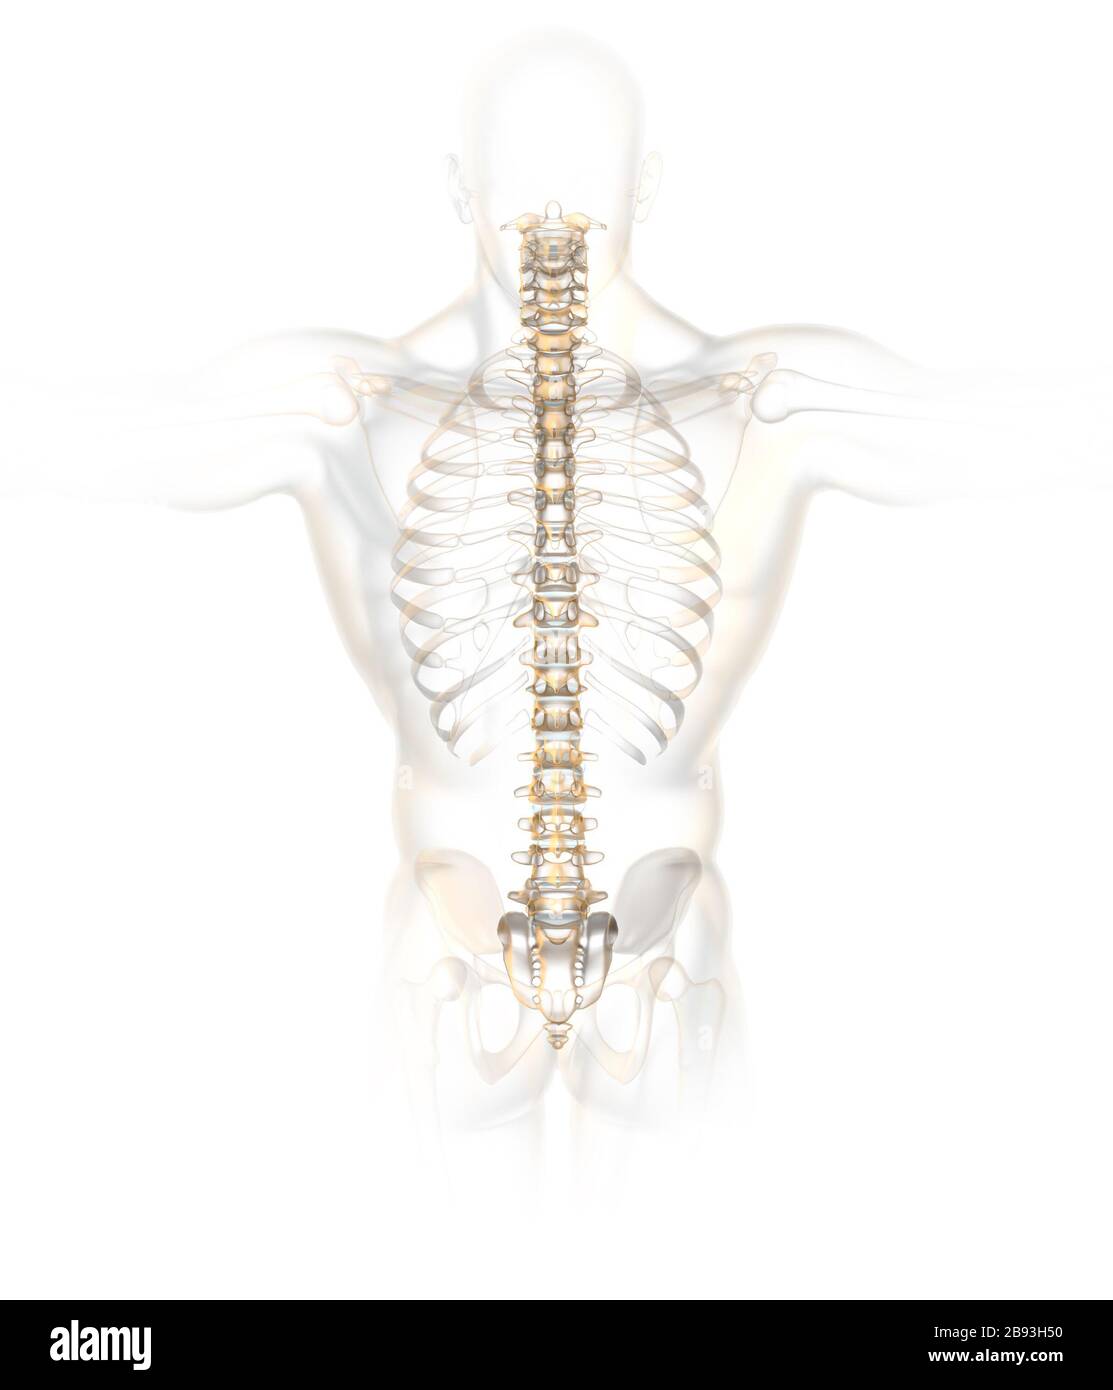 3D illustration showing skeleton of a woman, posterior view Stock Photo